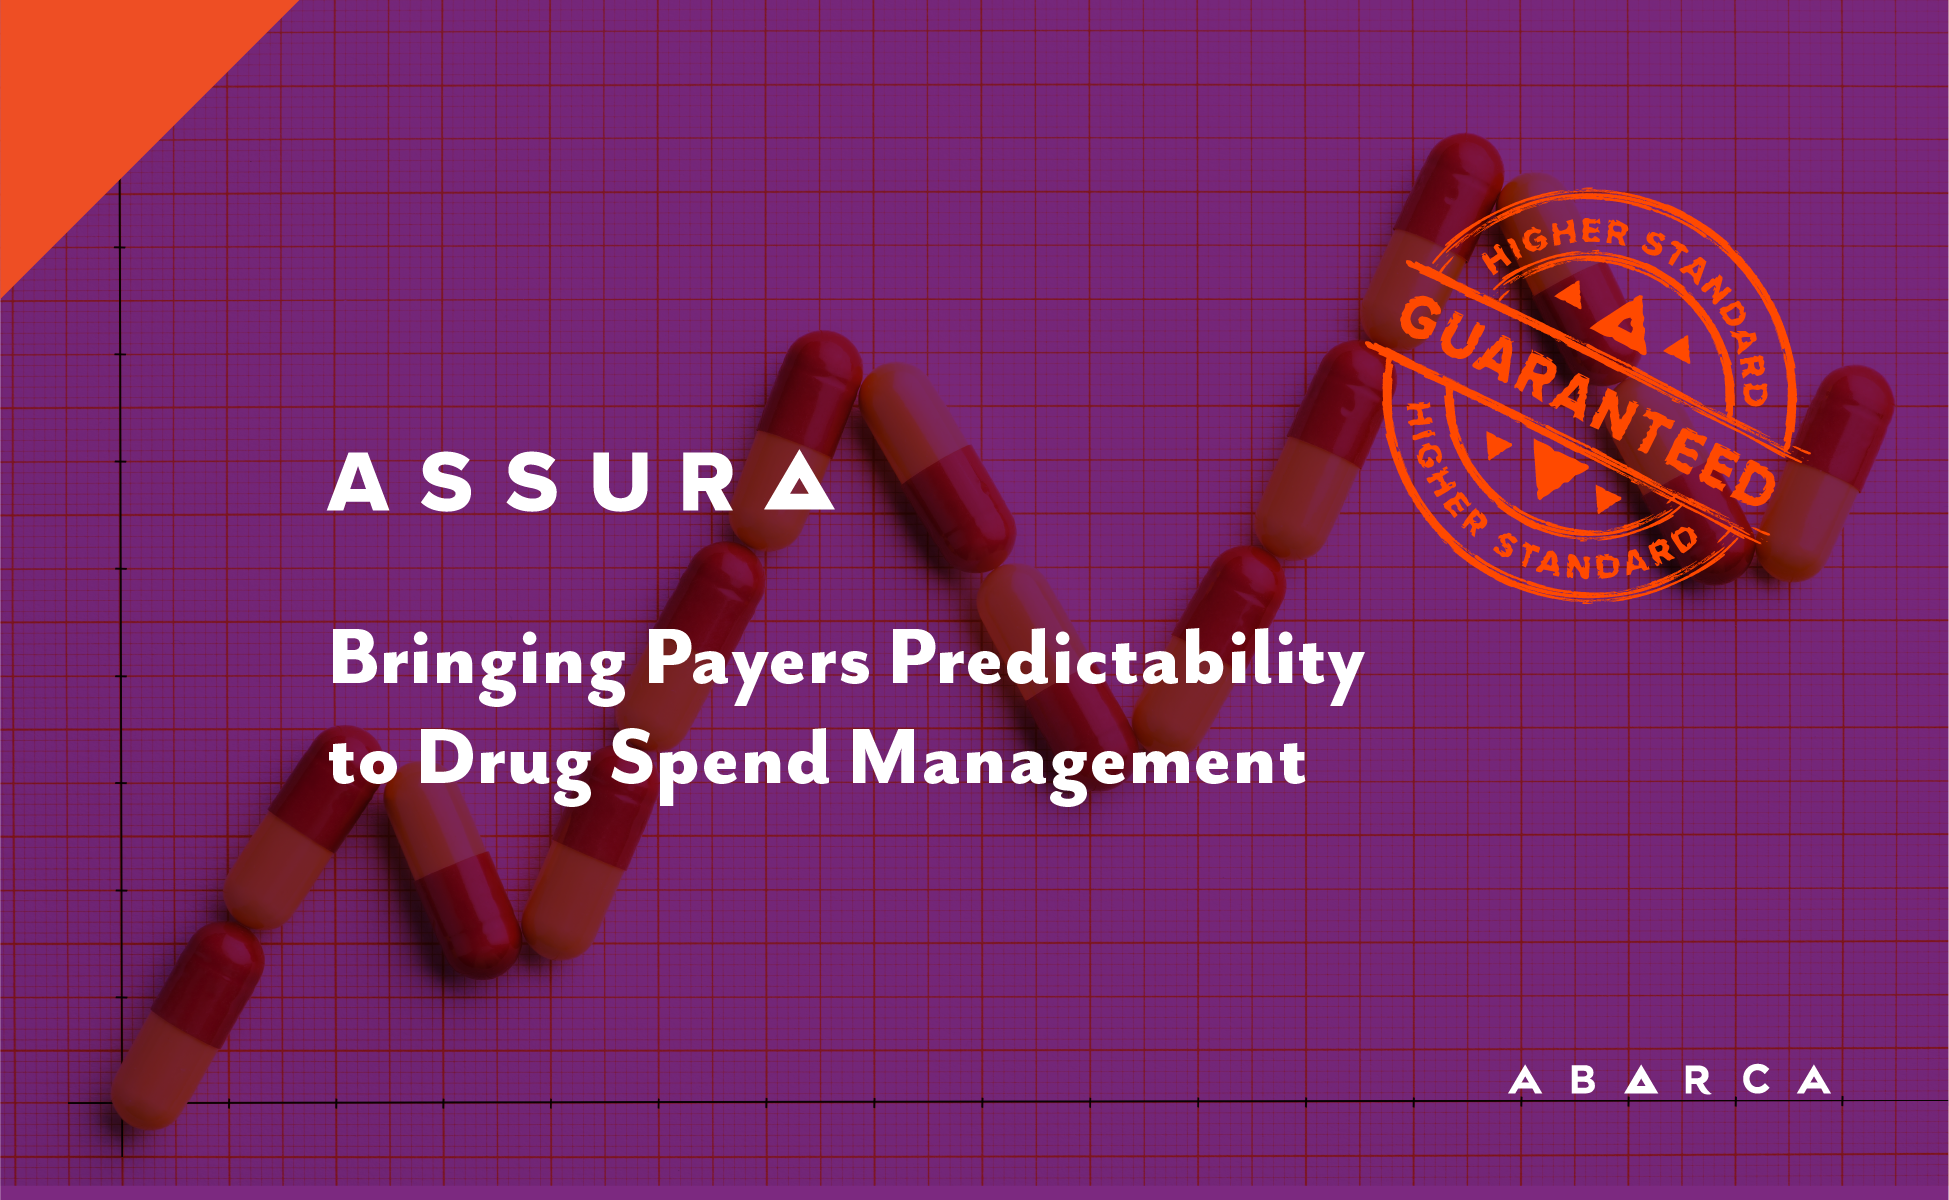 Introducing Assura: Abarca's new net cost guarantee pricing solution